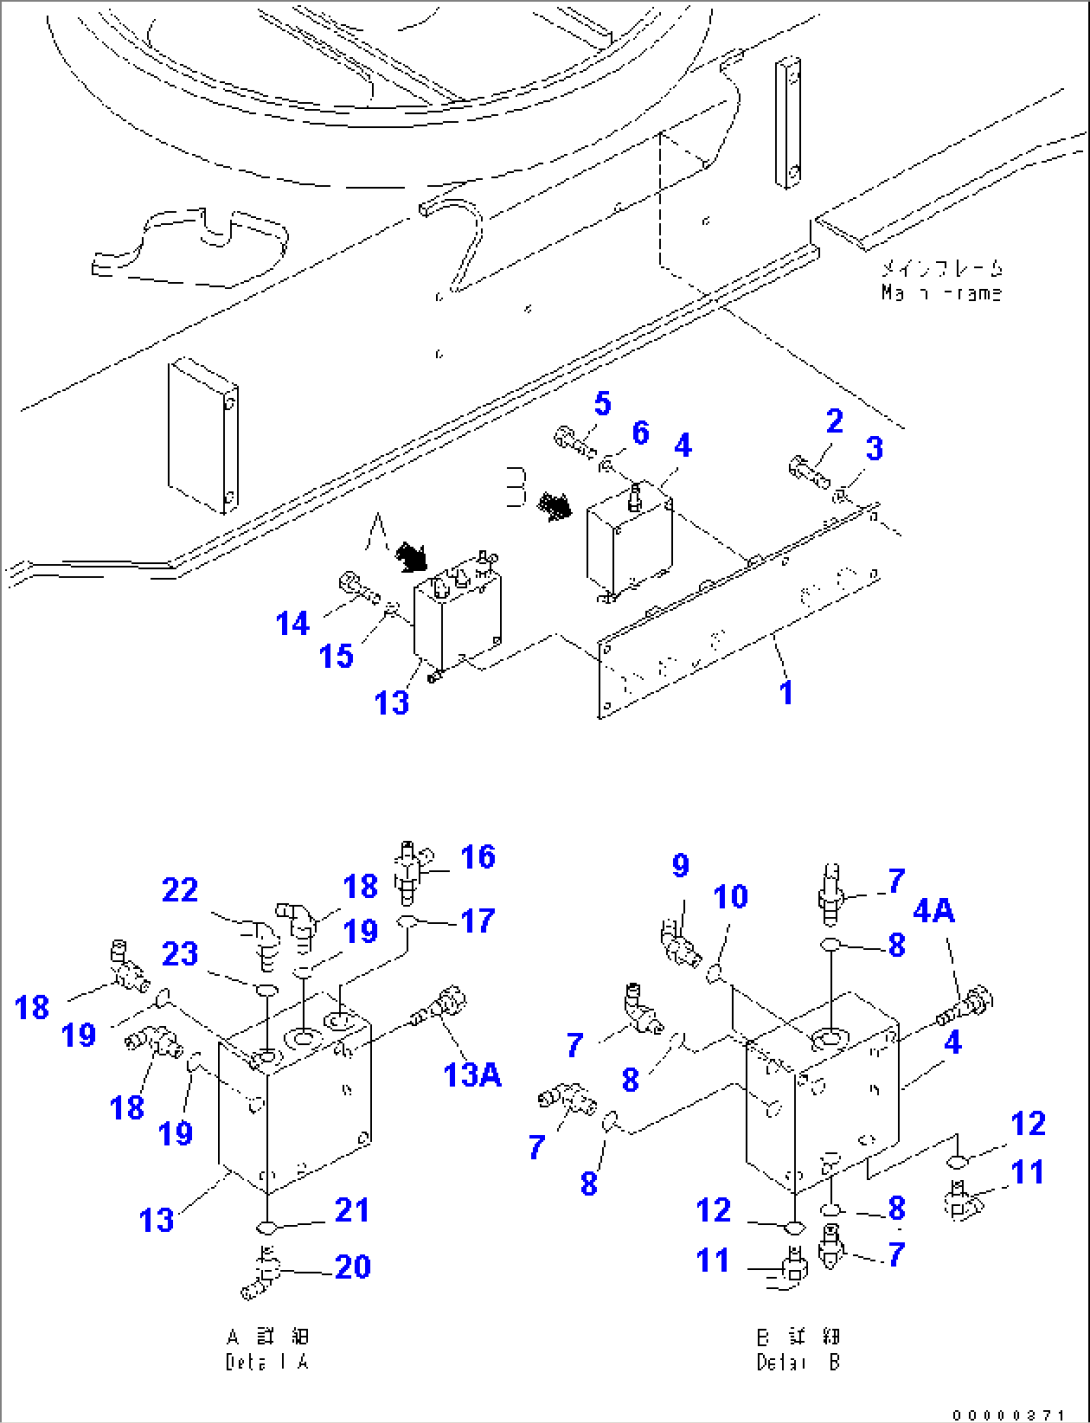 FRONT OUTRIGGER AND REAR DOZER PIPING (3/4)